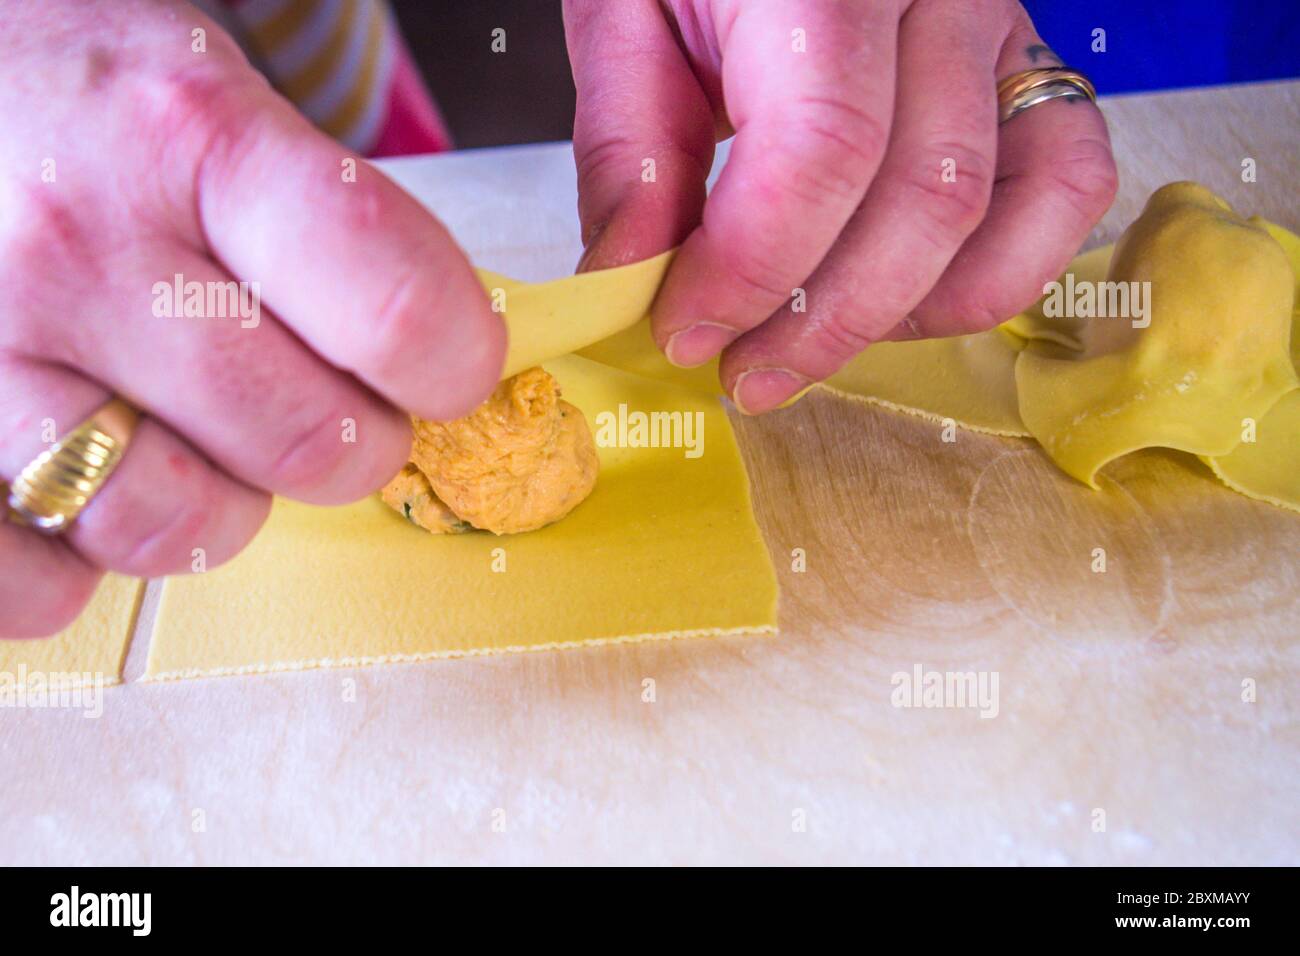 hand of the Italian housewife prepares egg pasta, ravioli and tortelli, stuffed with salmon stuffing, for the party lunch. Stock Photo